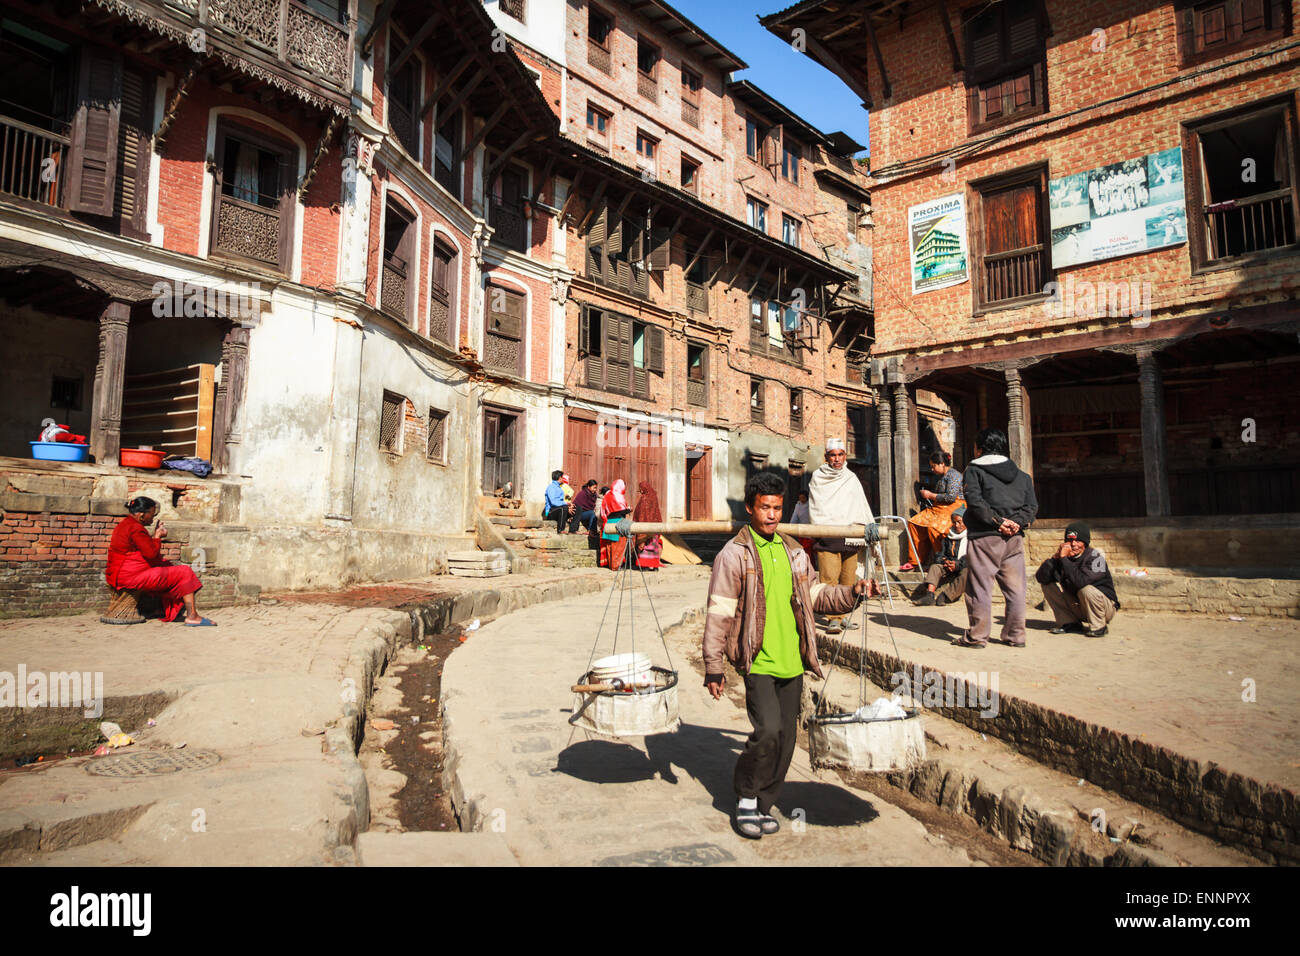 Typical street scene in the historic city of Bhaktapur, Nepal Stock Photo